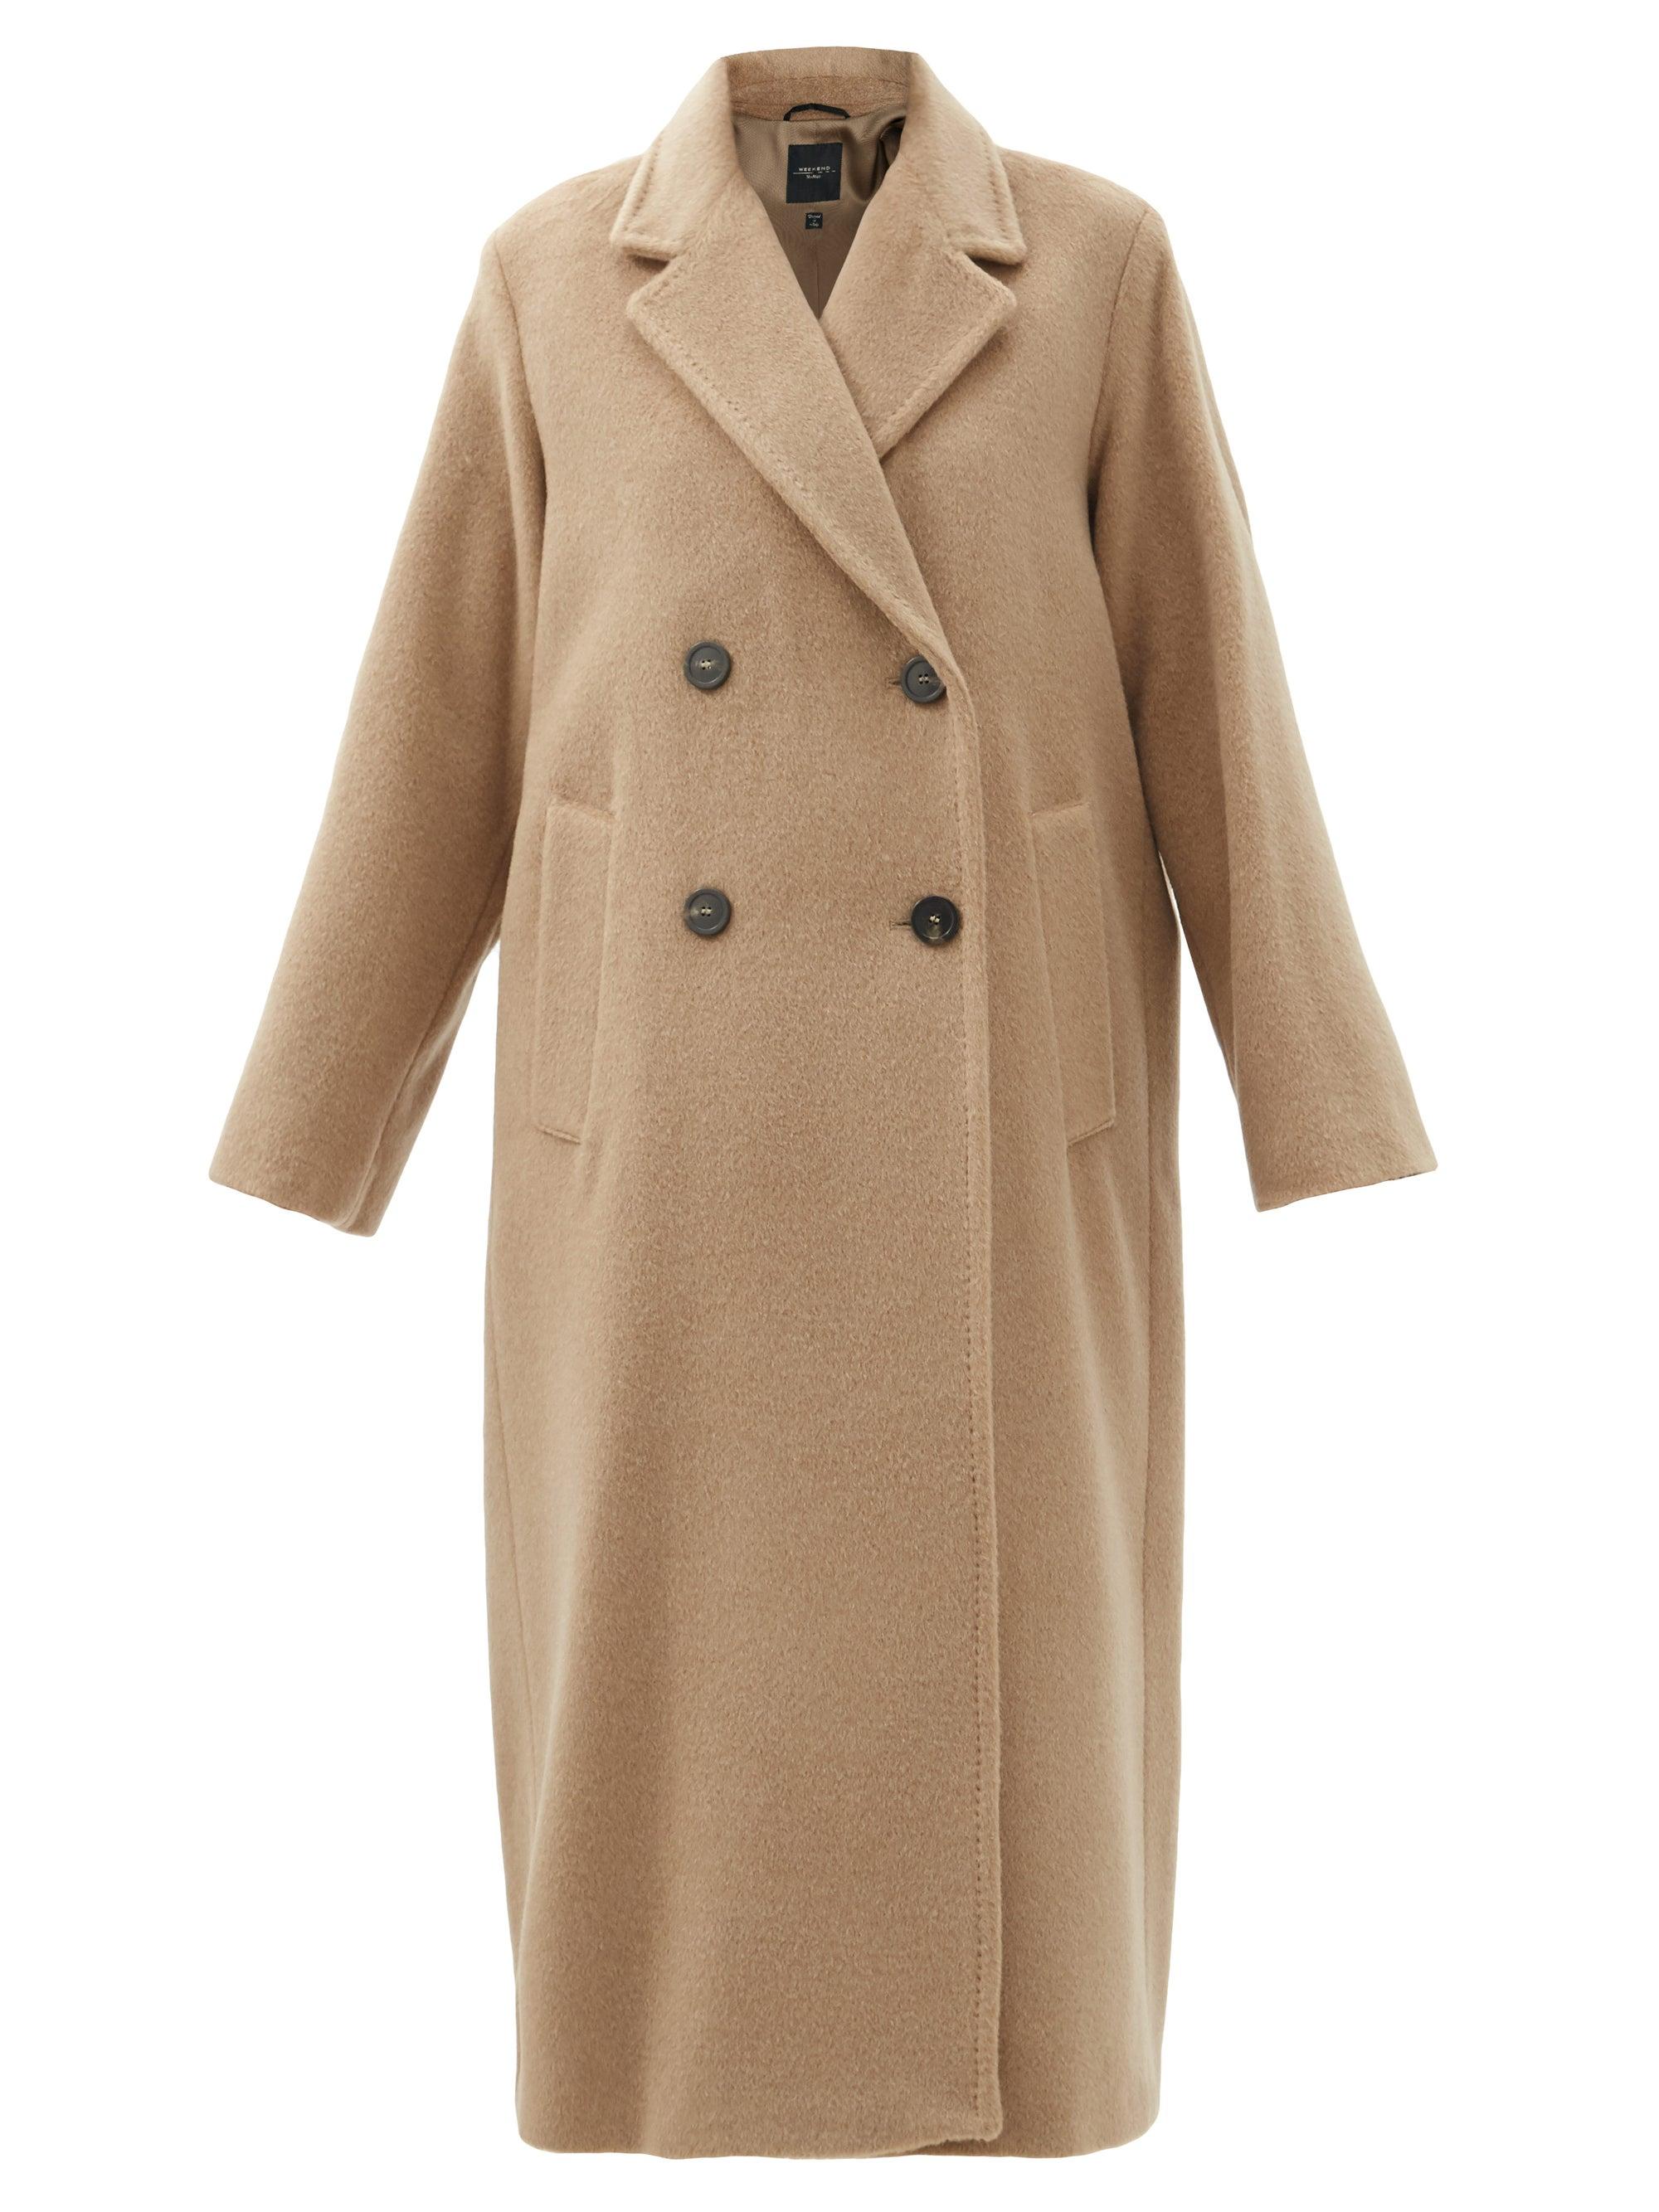 Weekend by Maxmara Wool Parma Coat in Camel (Natural) | Lyst Canada